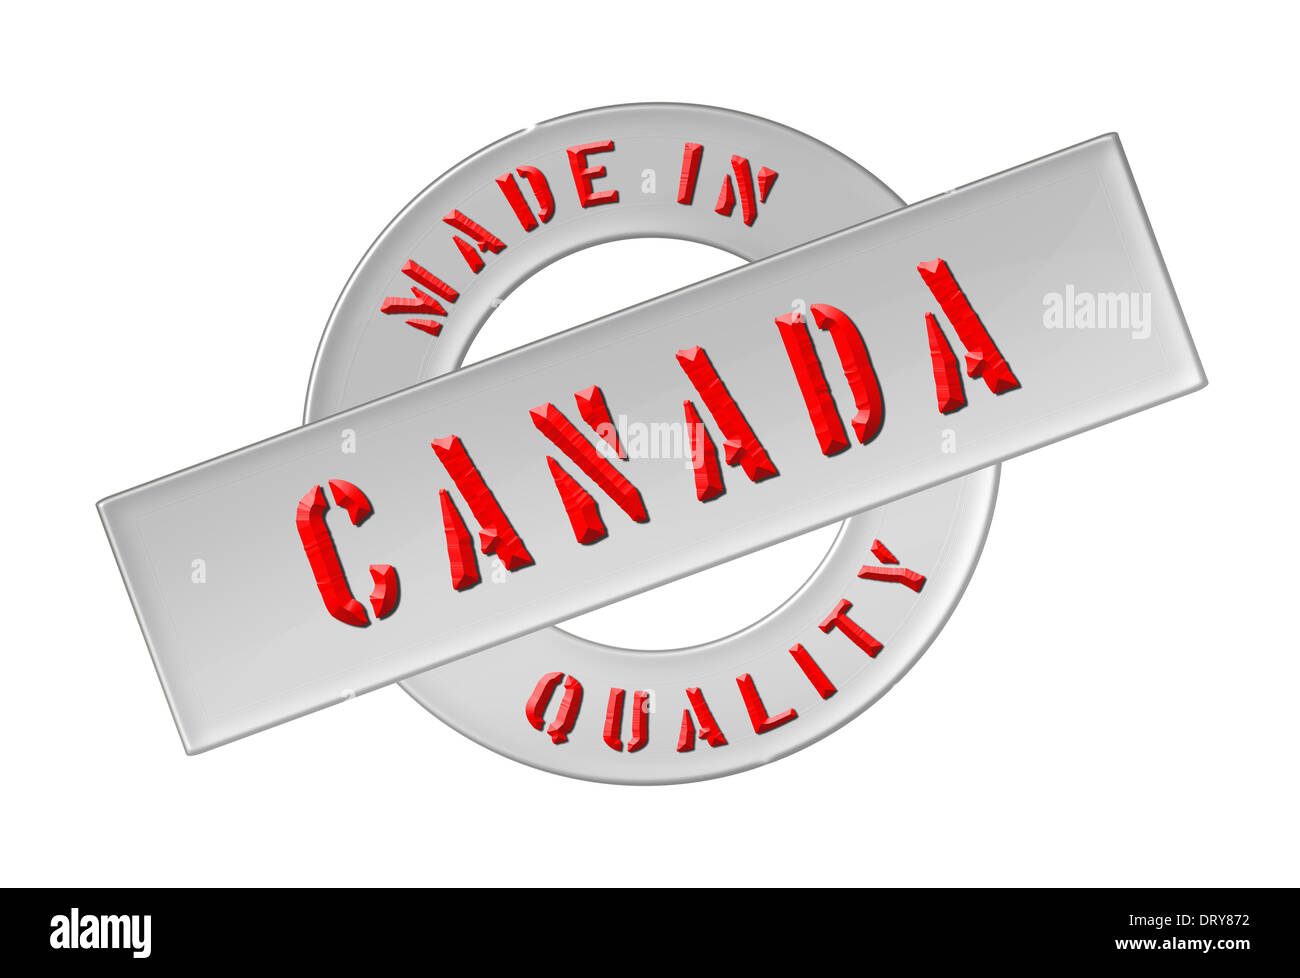 Made in canada Stock Photo